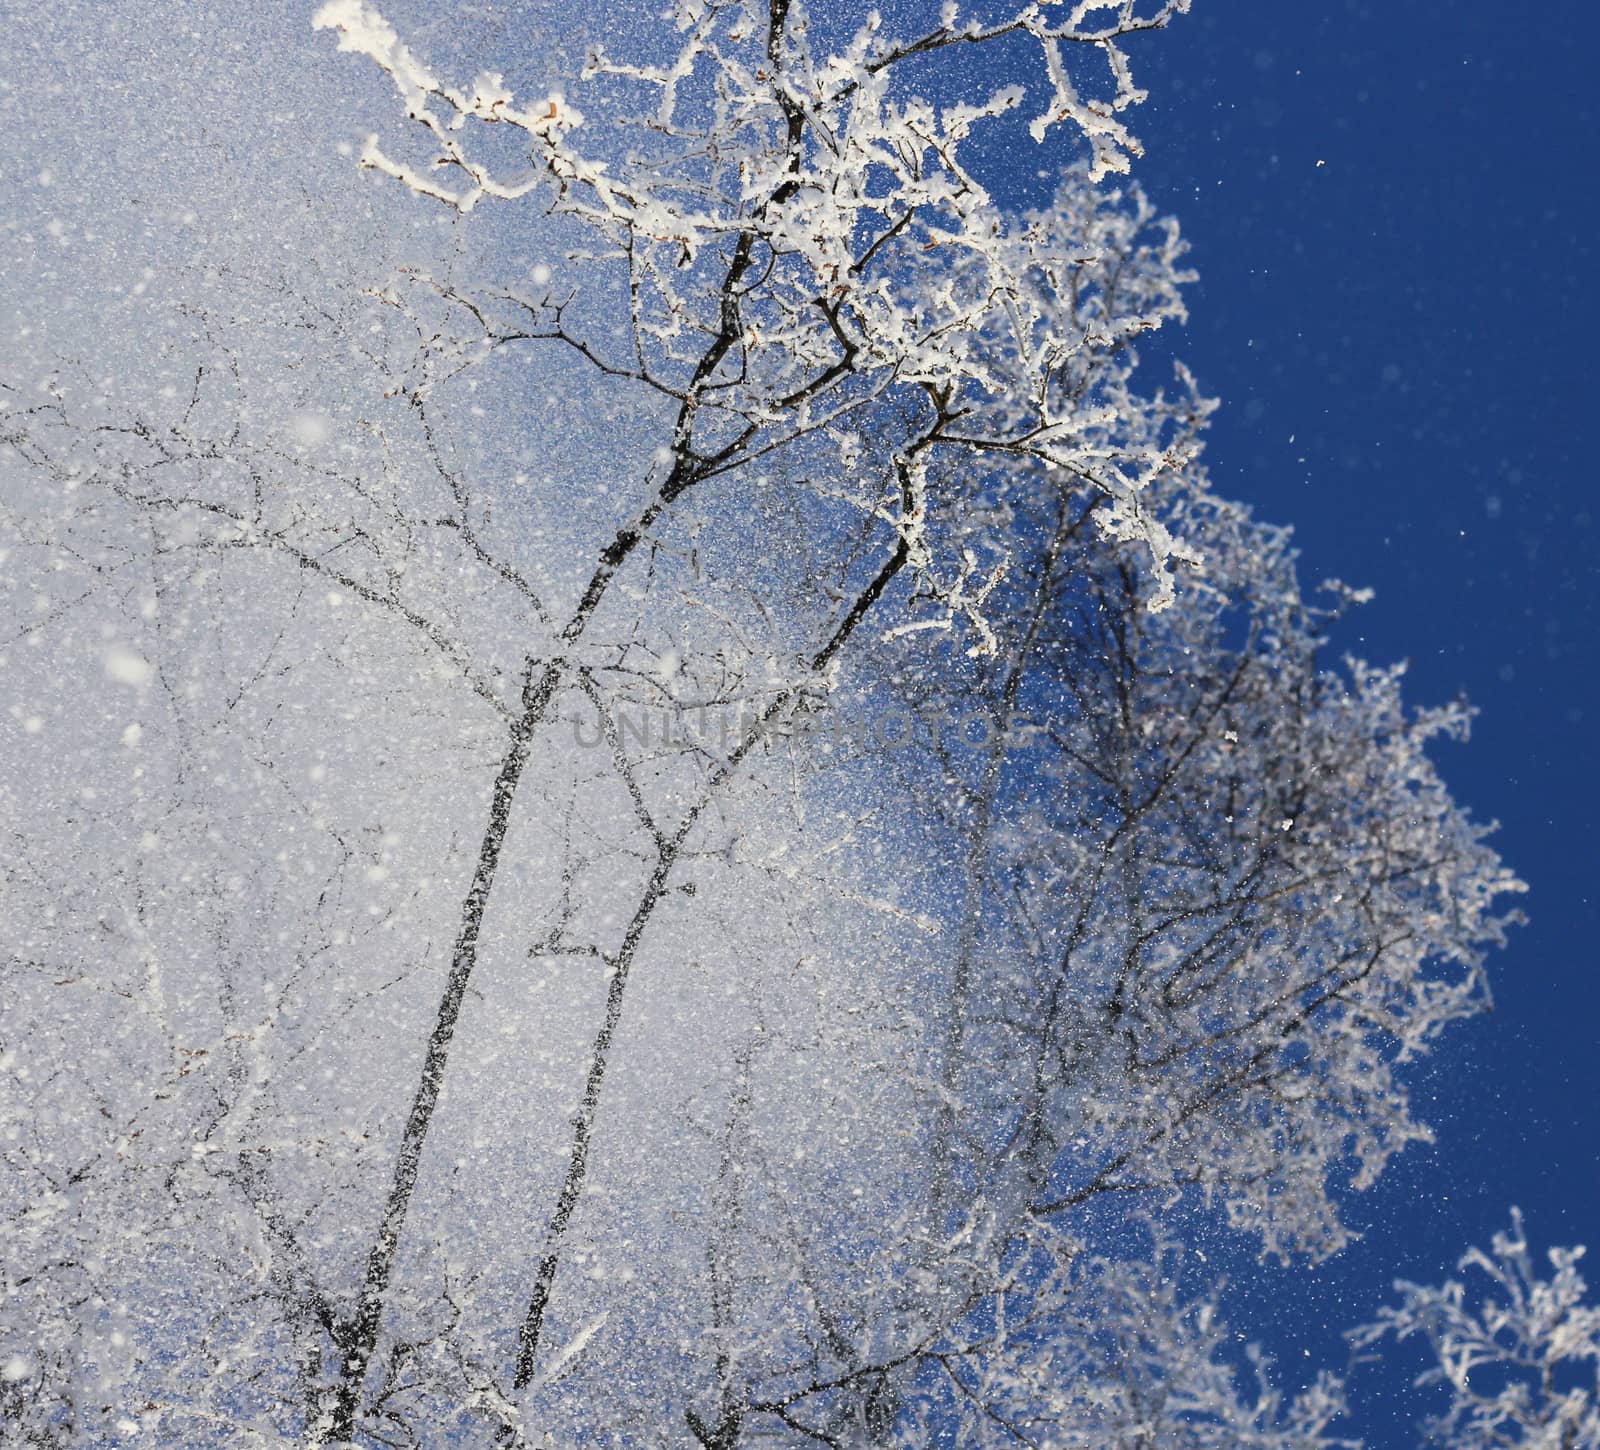 Snowflakes falling from treetops, winter season concept